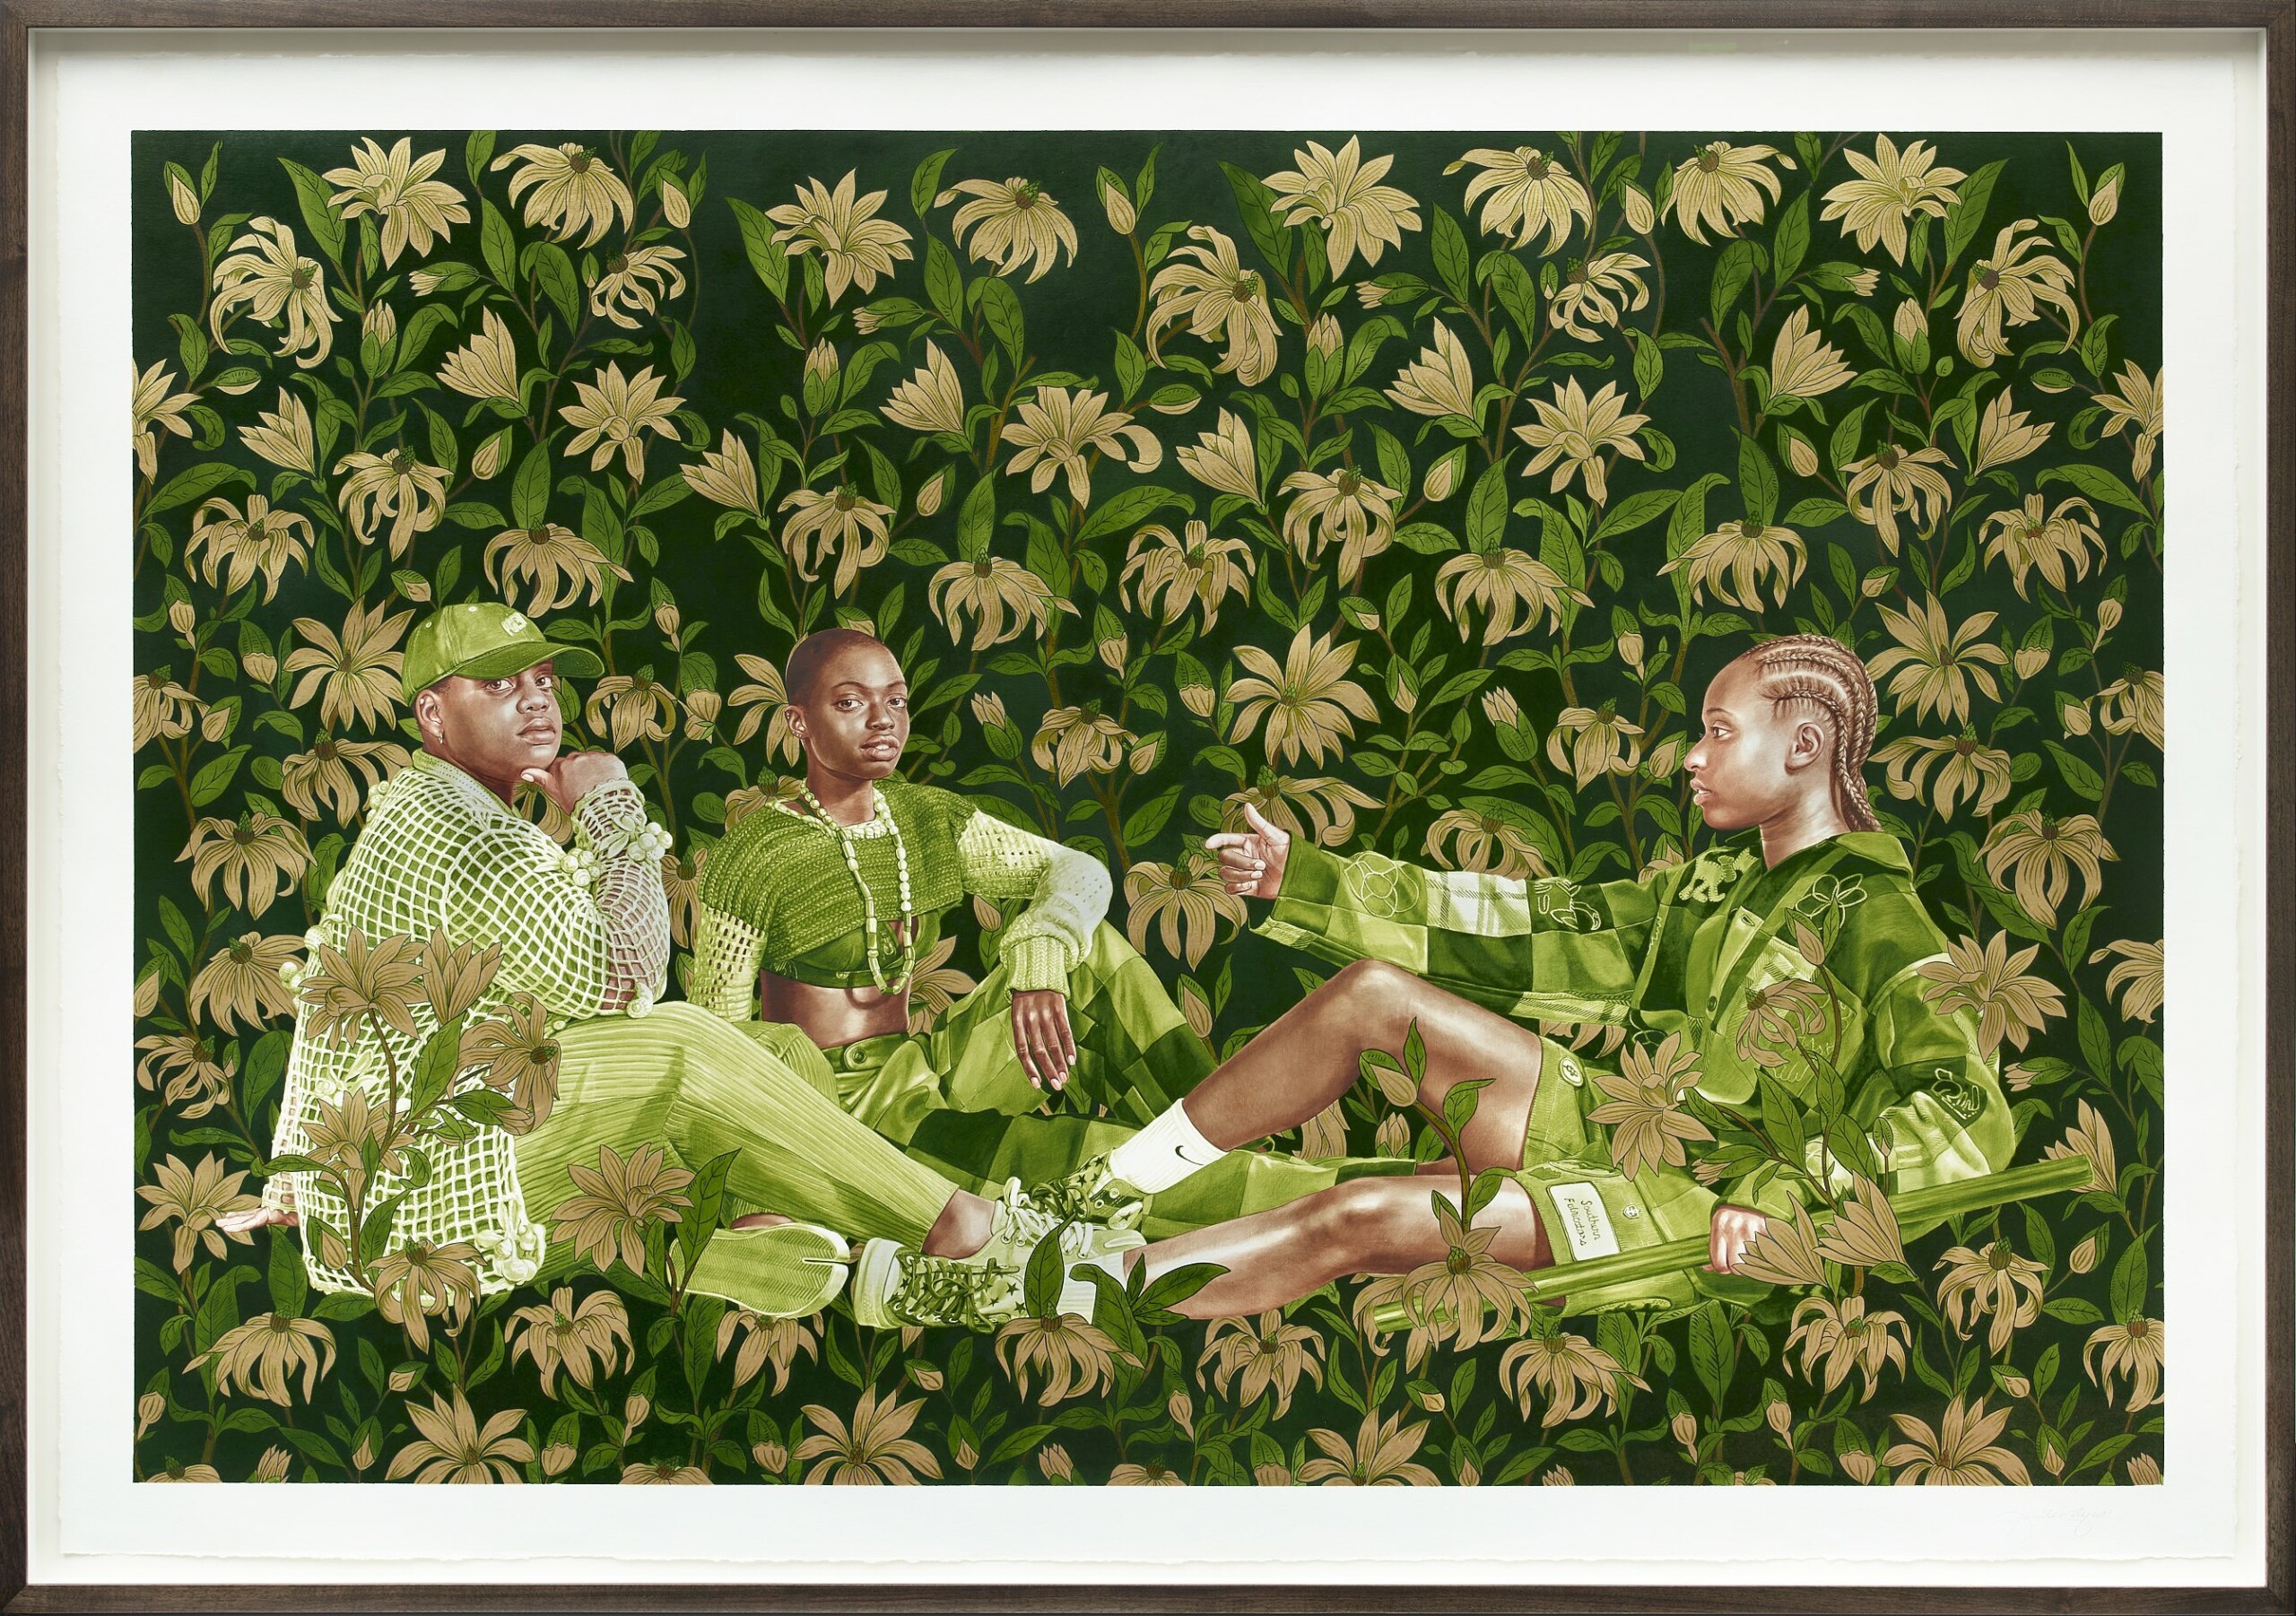 kehindewiley_Lunch_with_Inettia,_Lucemy_and_Soukenya